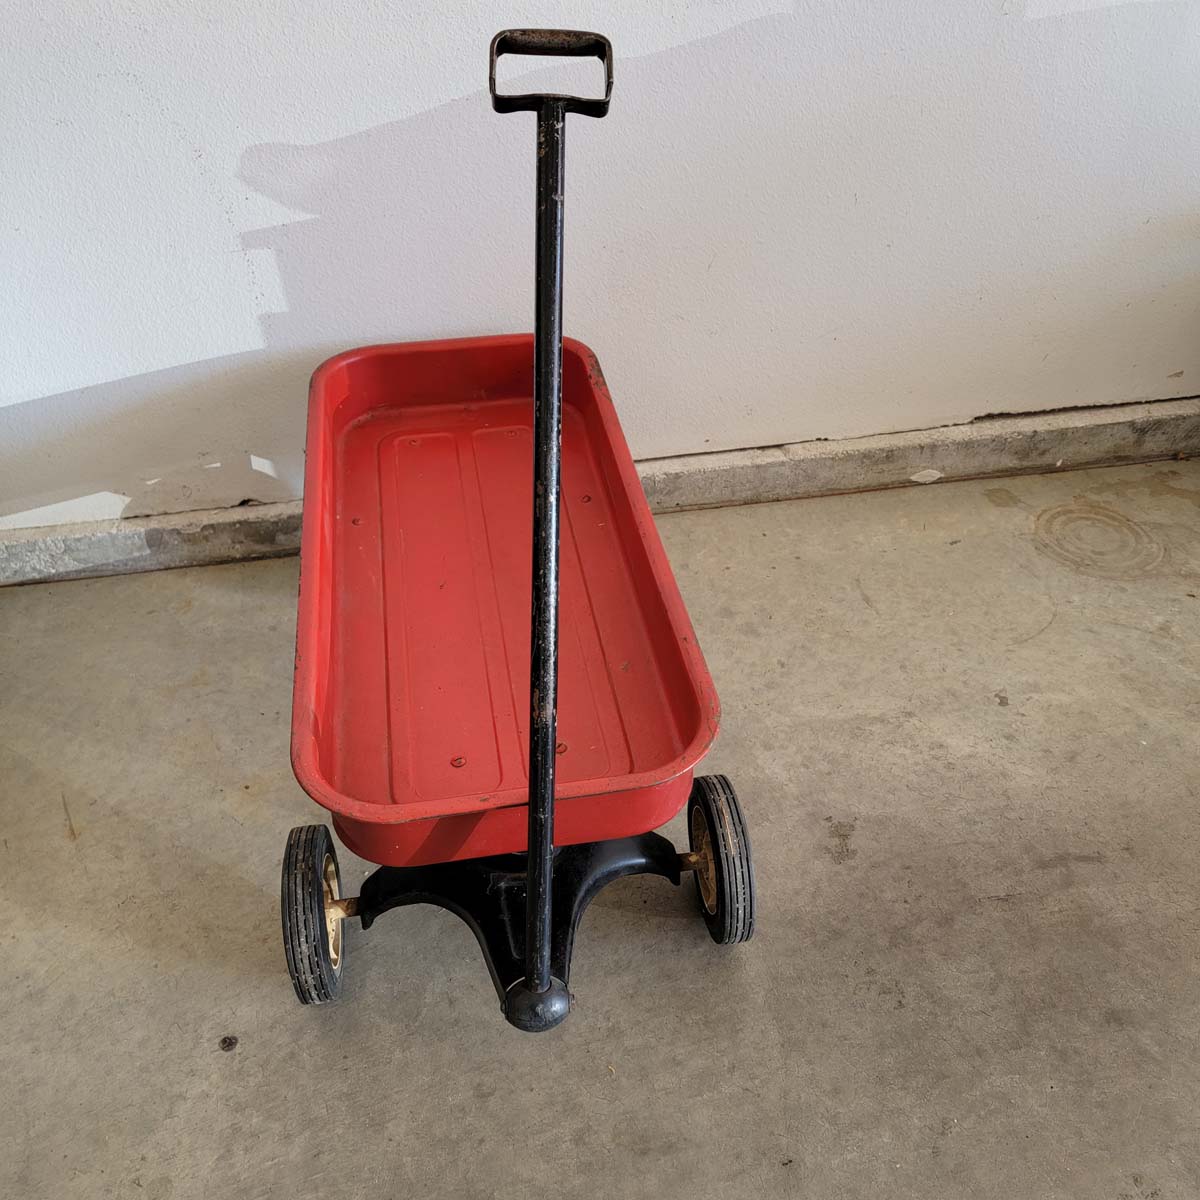 Radio Flyer Model 89 Little Red Wagon - Steel | Armstrong Family